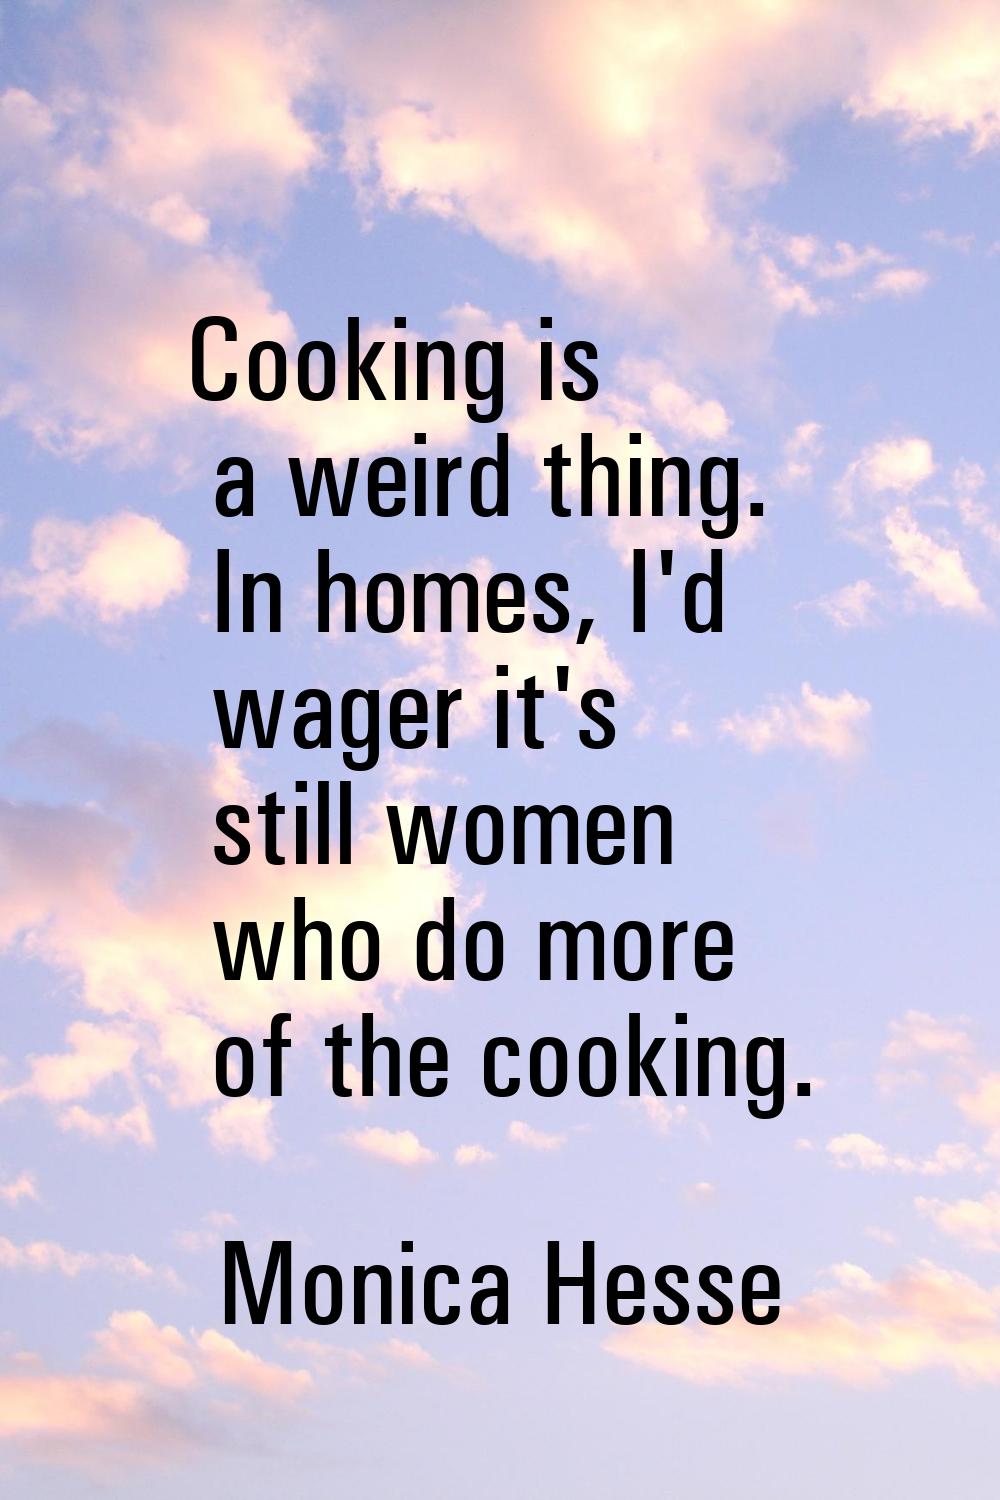 Cooking is a weird thing. In homes, I'd wager it's still women who do more of the cooking.